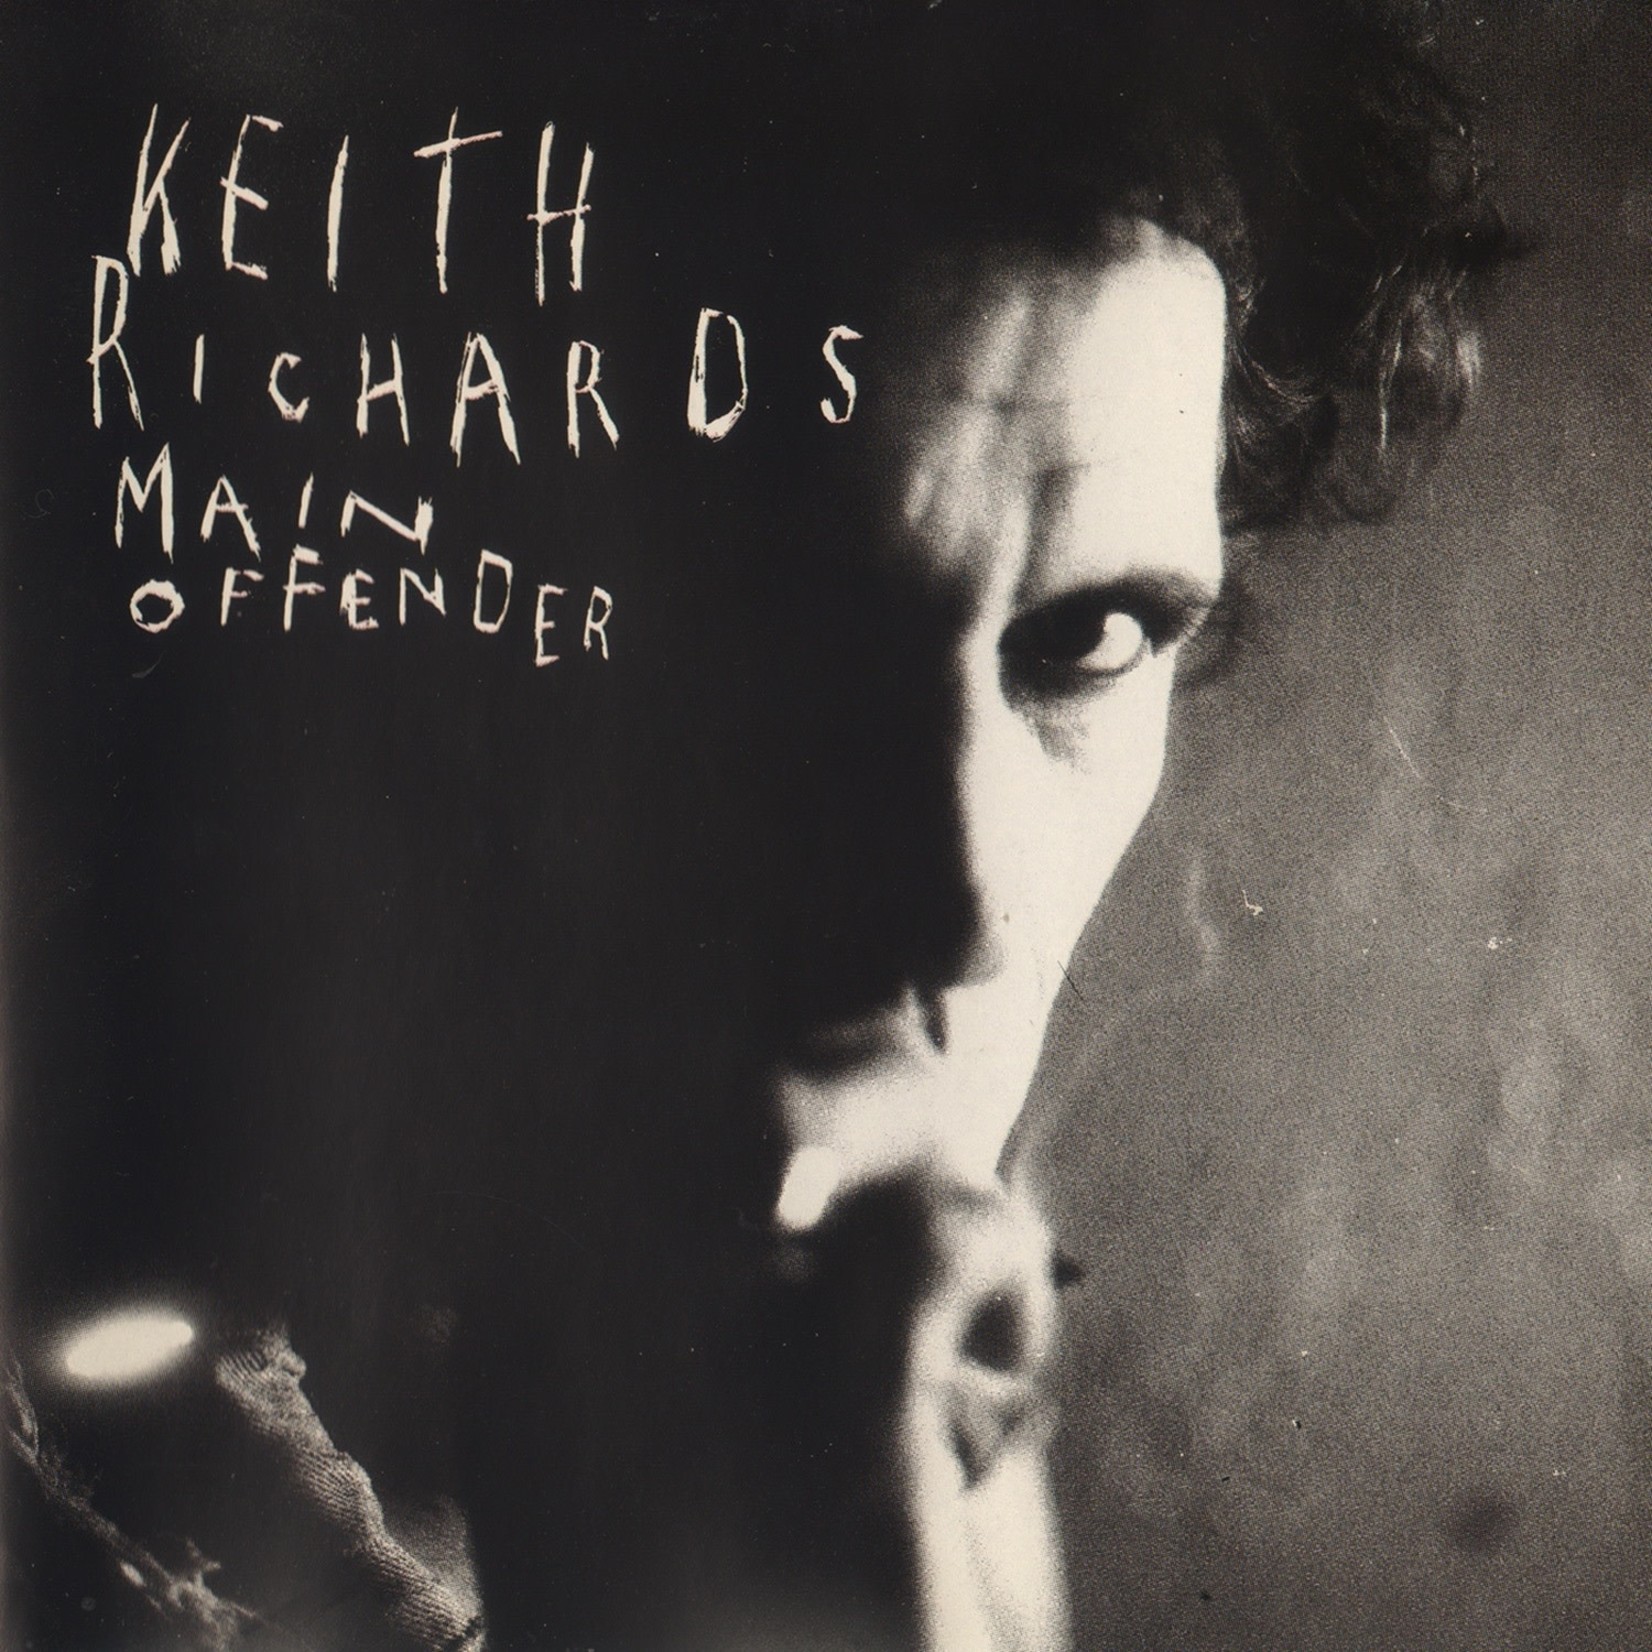 [Discontinued] Keith Richards - Main Offender